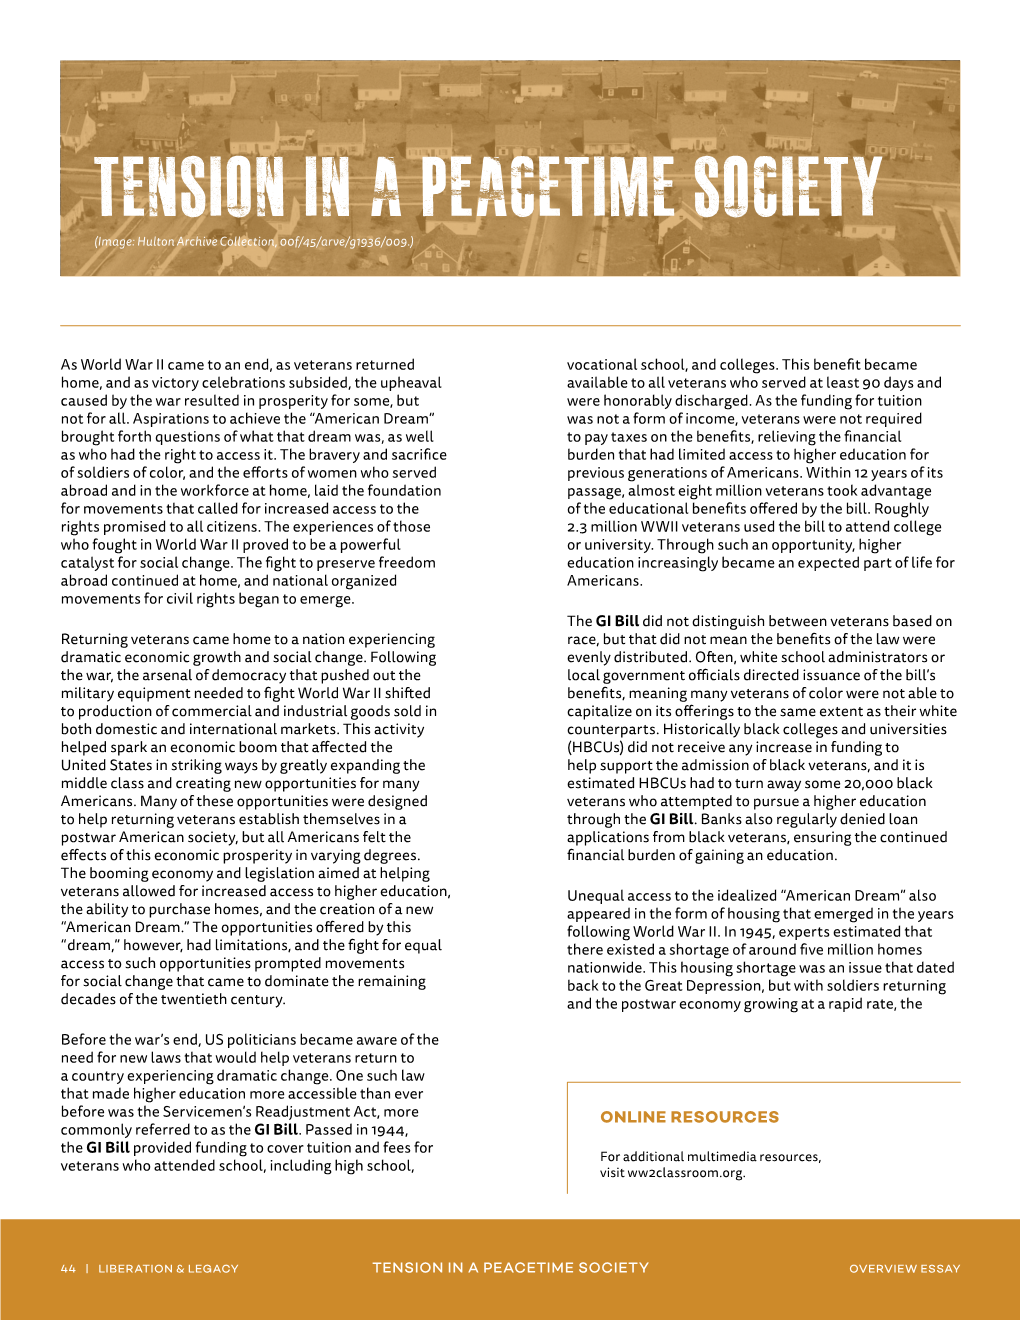 Tension in a Peacetime Society